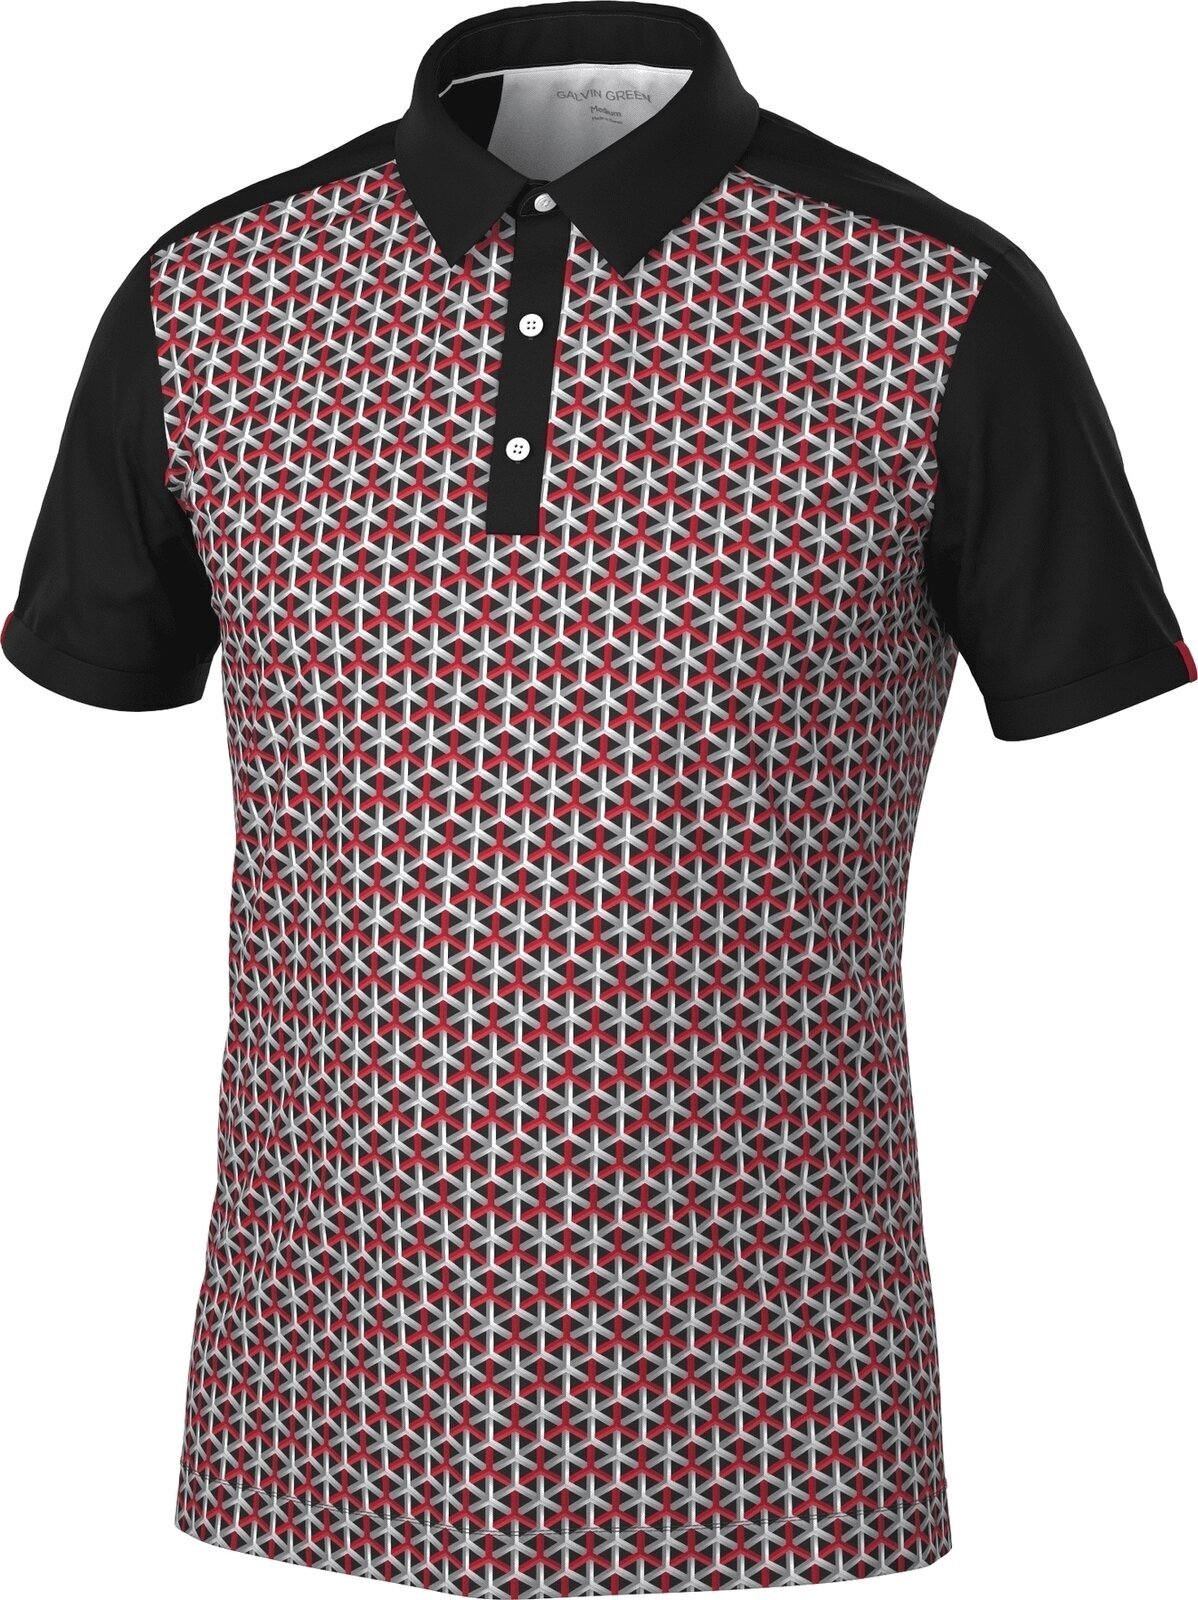 Chemise polo Galvin Green Mio Mens Breathable Short Sleeve Shirt Red/Black L